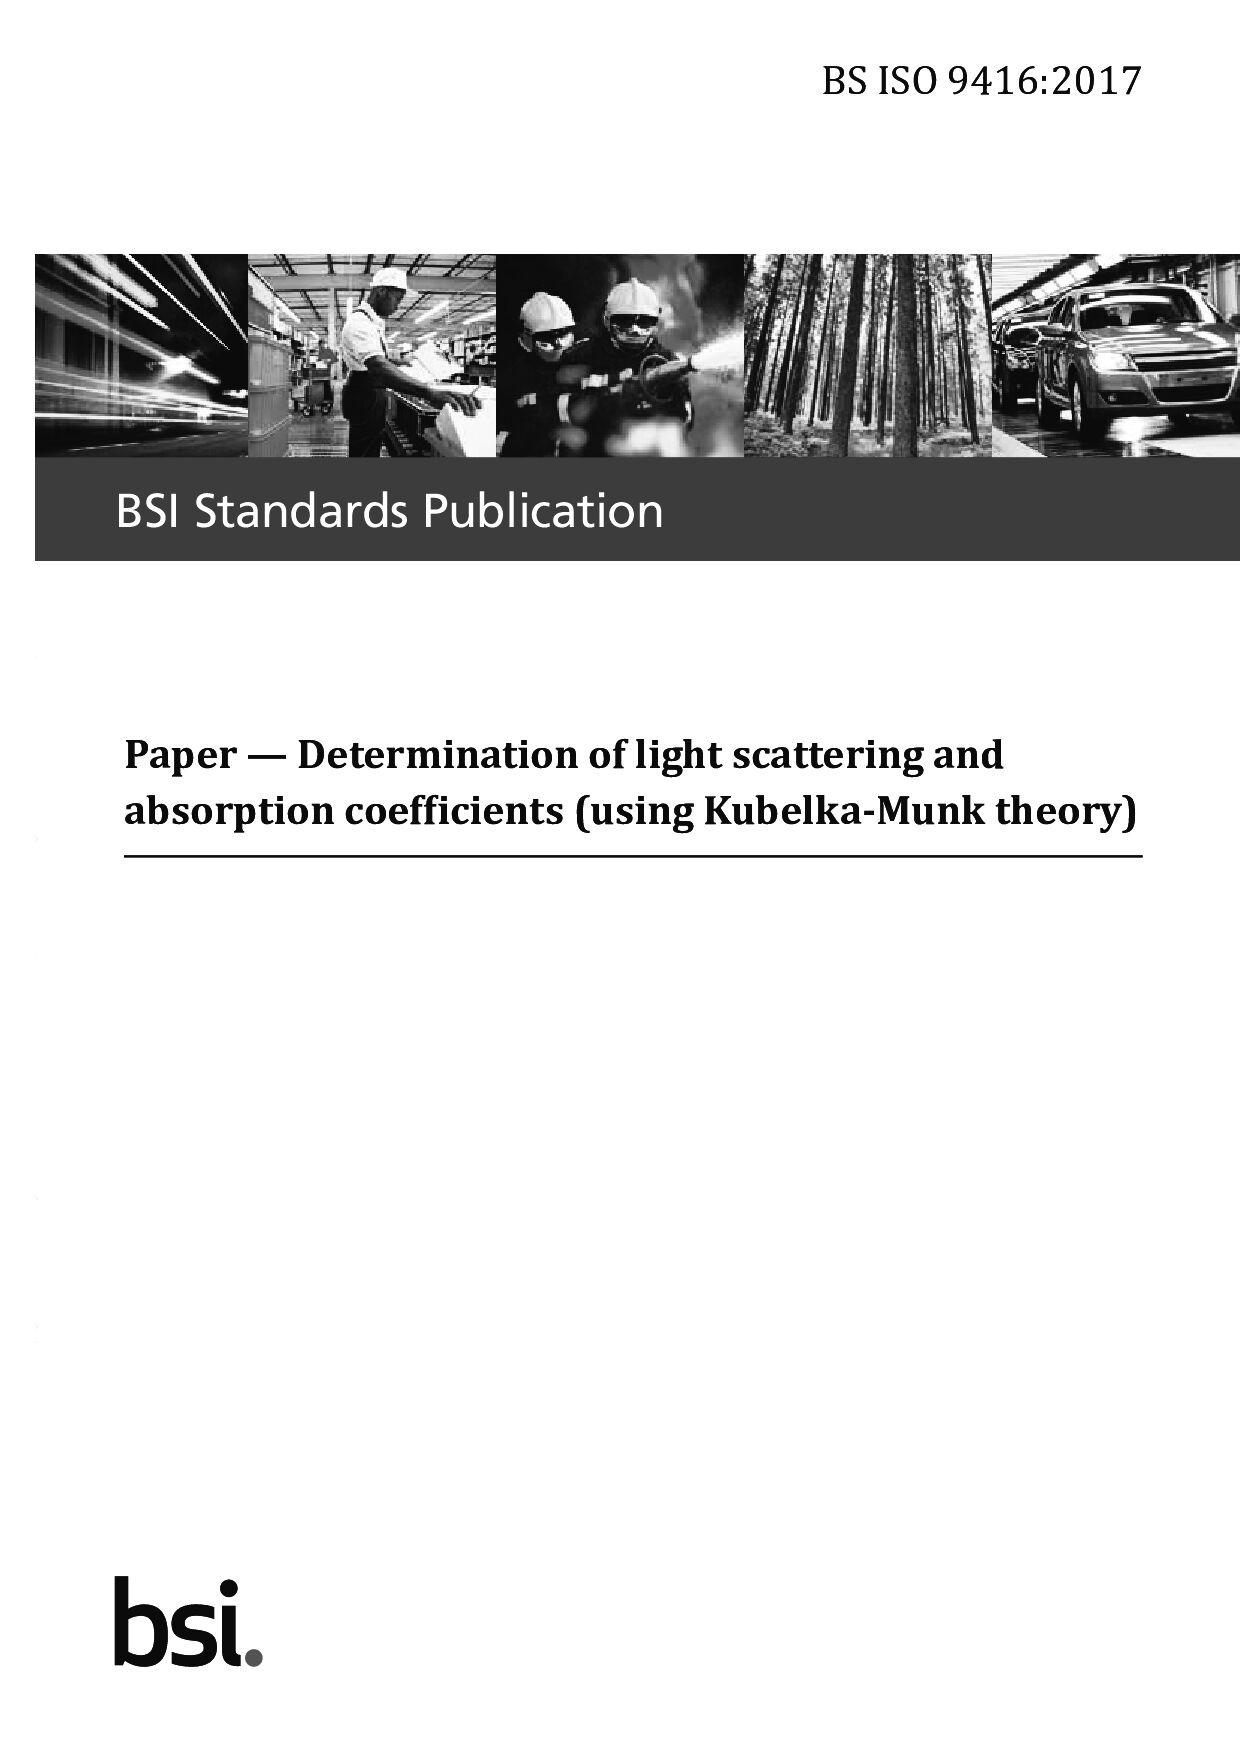 BS ISO 9416-2017